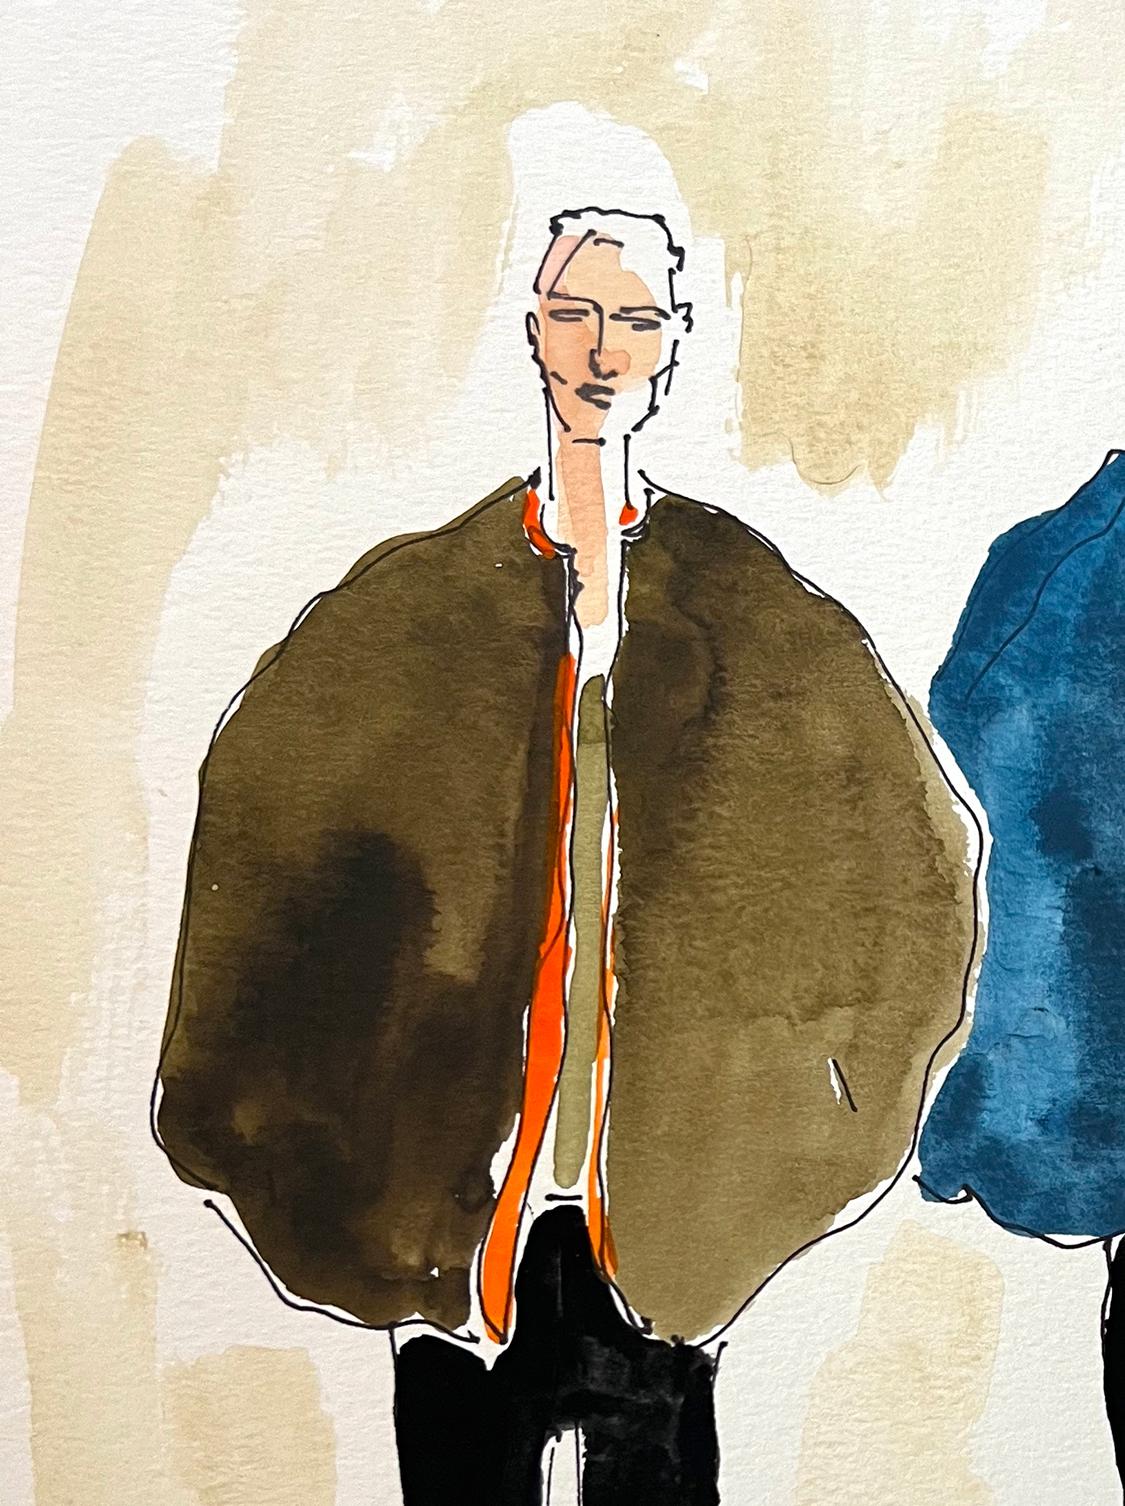 Prada puffy coats. Watercolor fashion drawing on archival paper - Art by Manuel Santelices